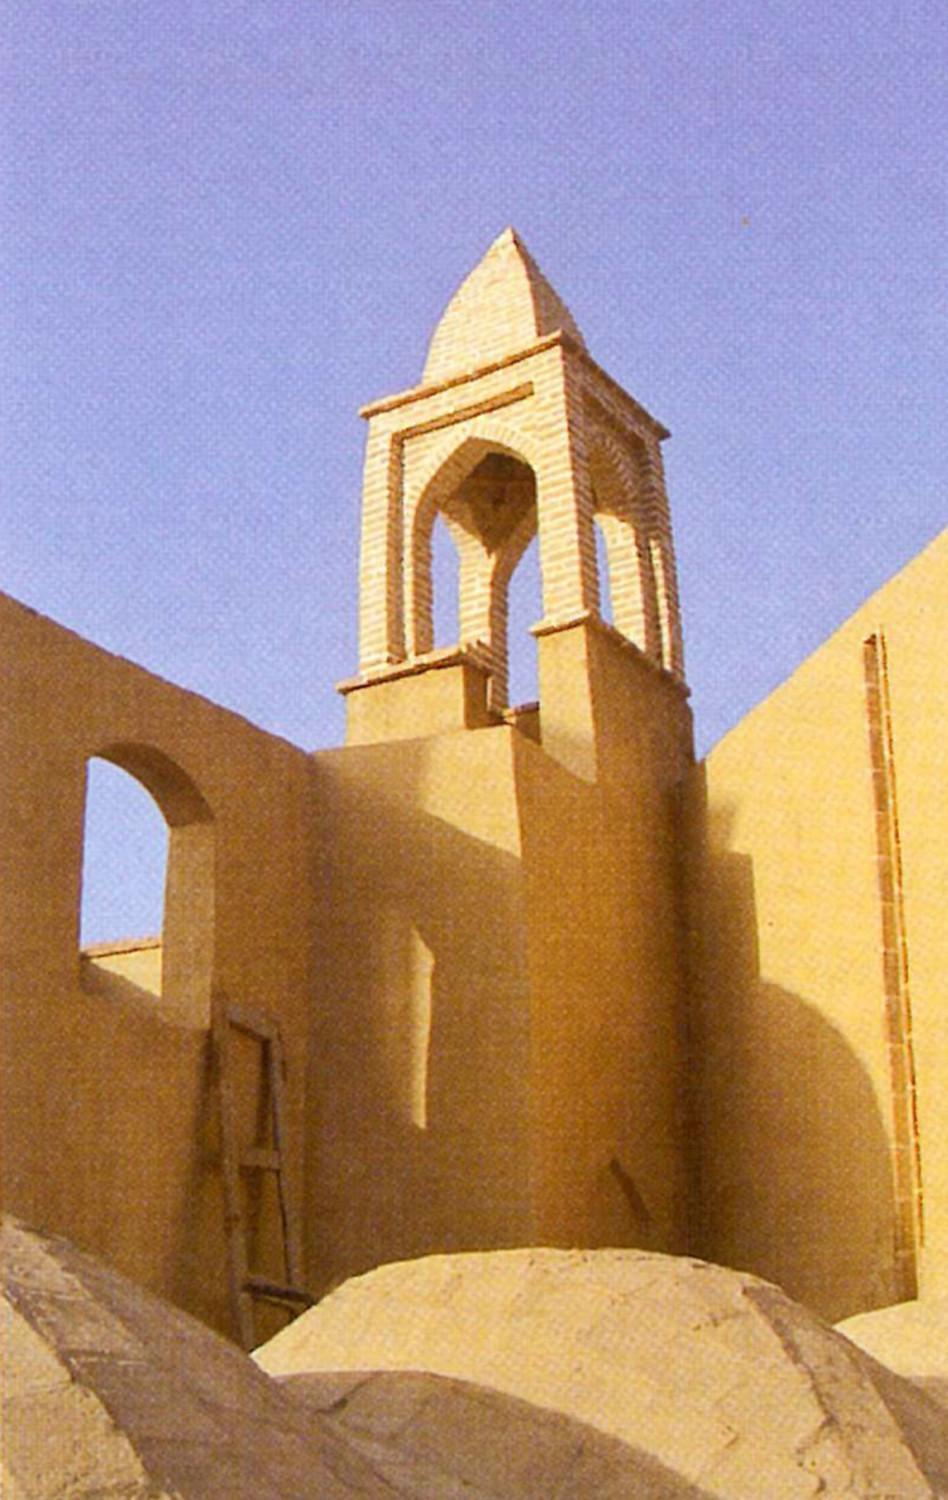 The perspective of the Masjed Jame “moazeneh” after revitalization